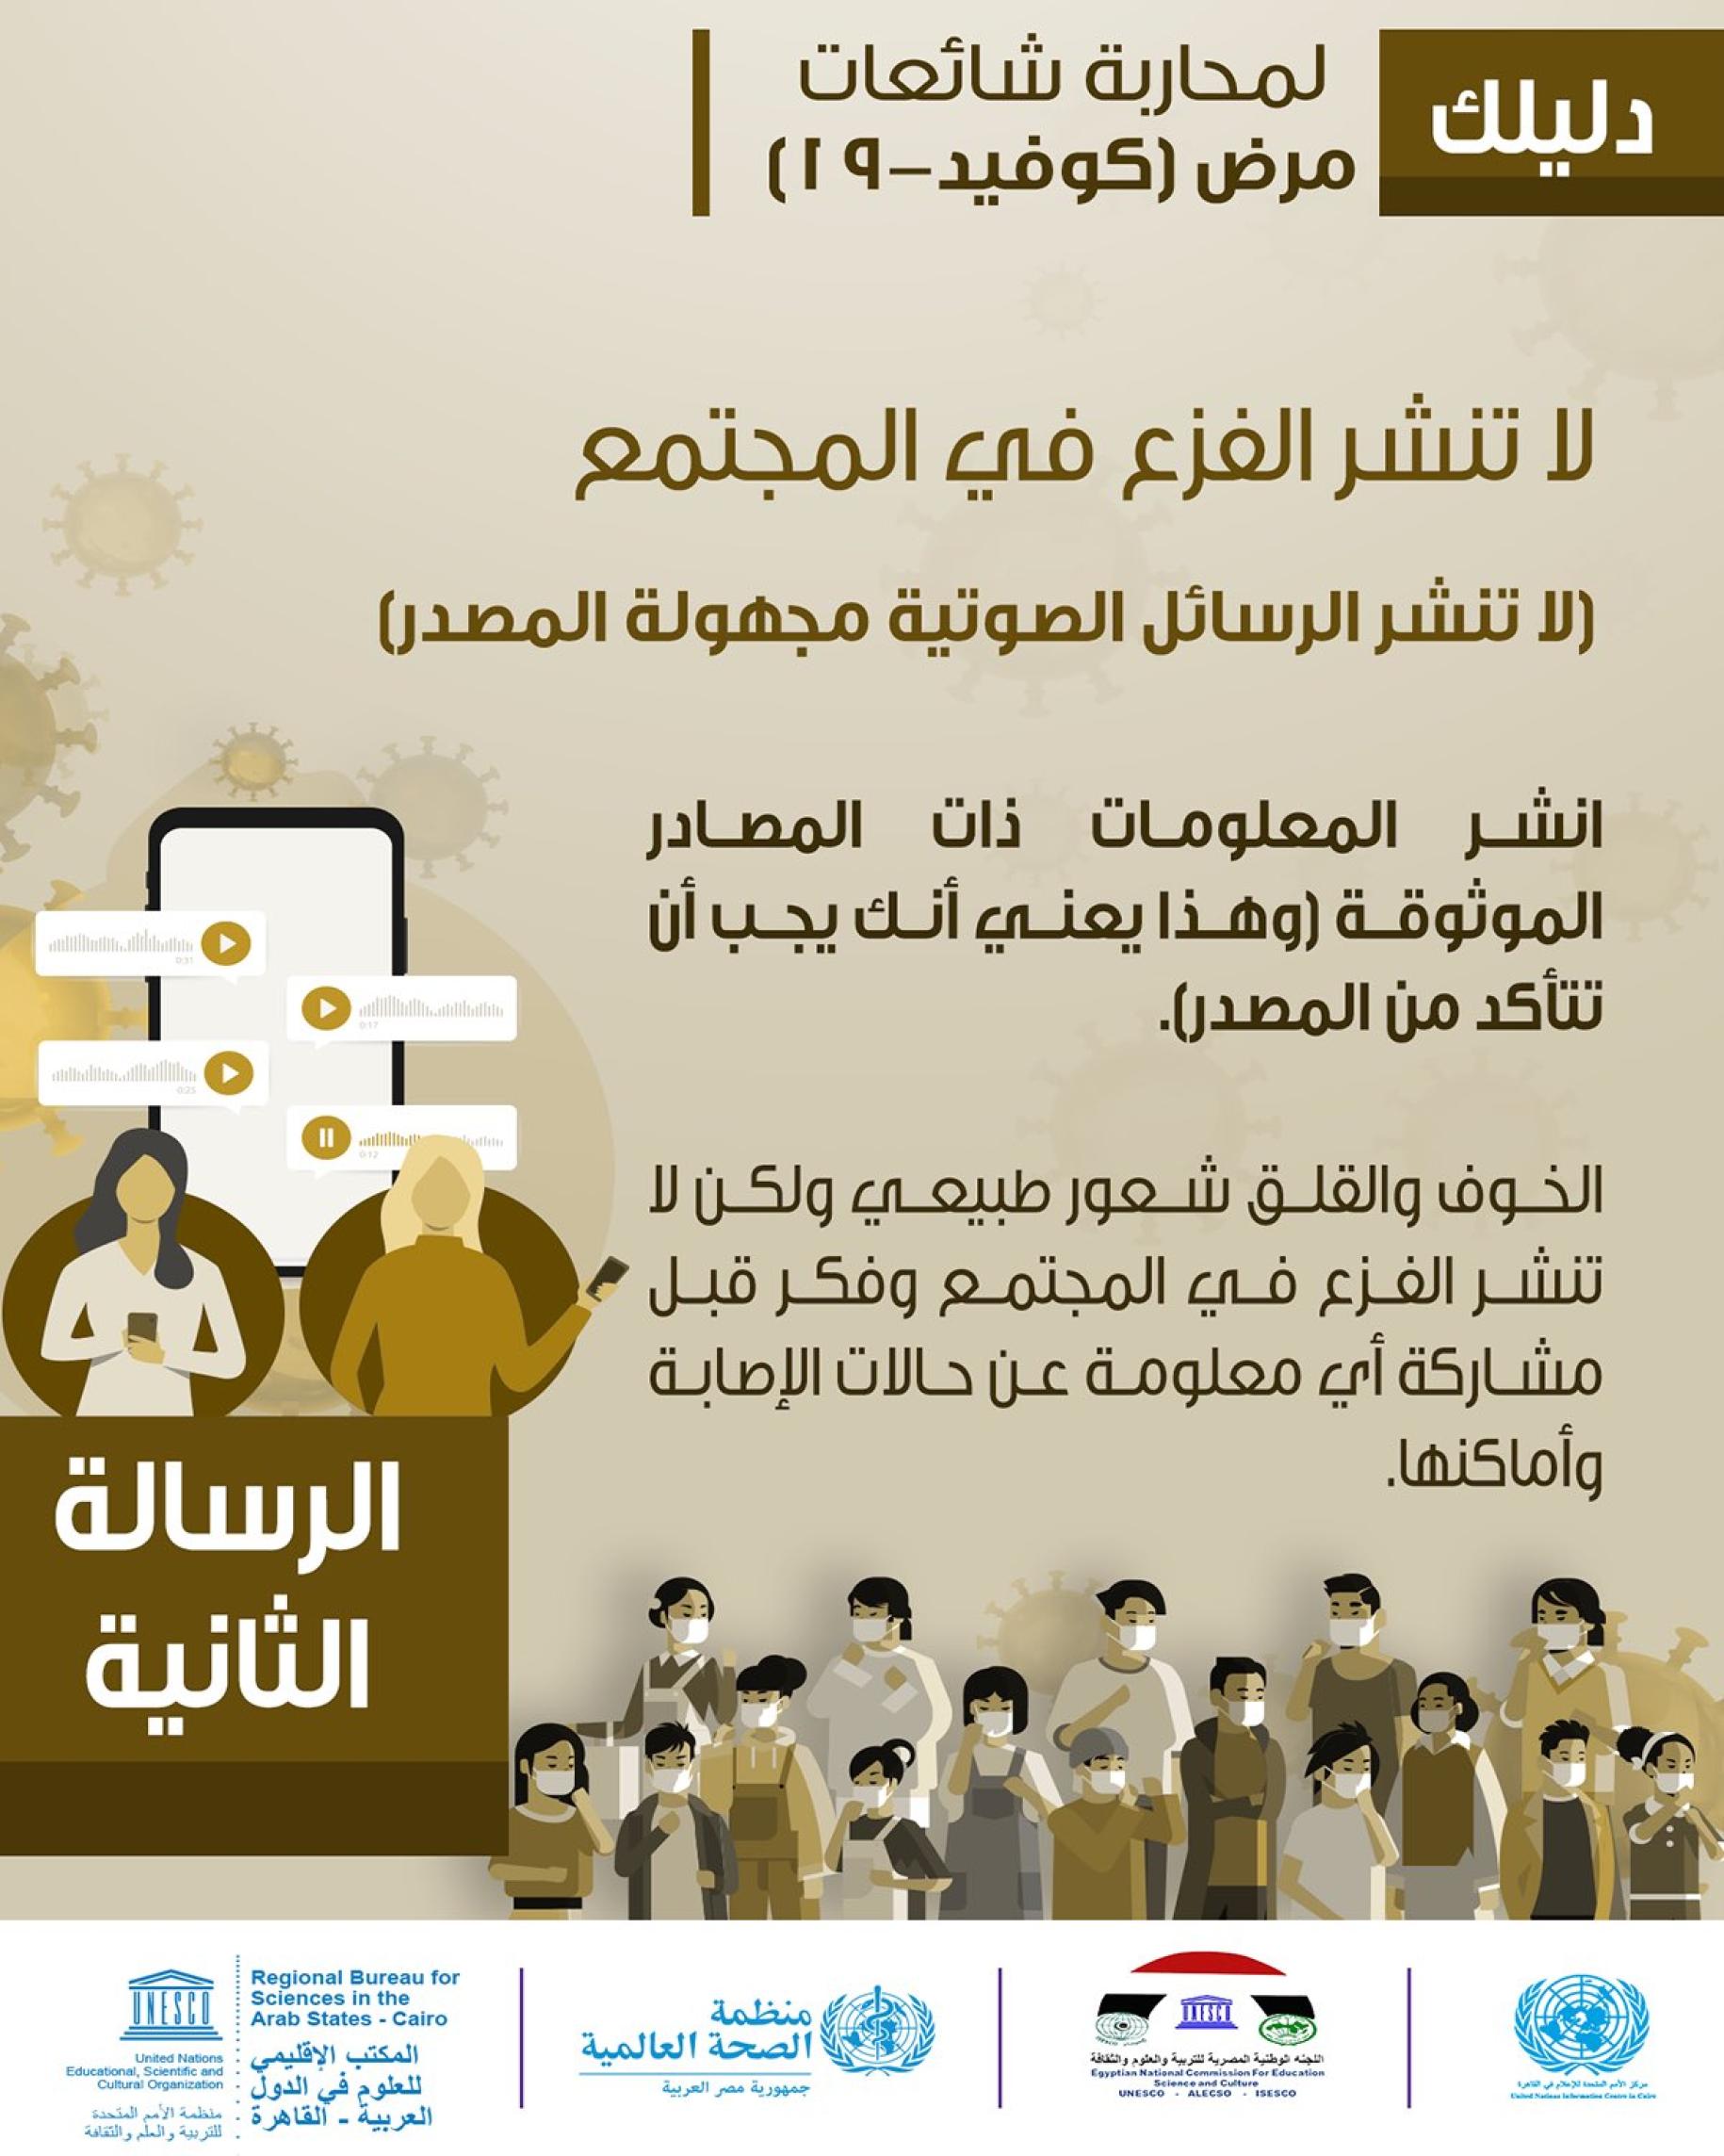 Shows a social media card with Arabic text that explains the validity of sources and what to avoid.